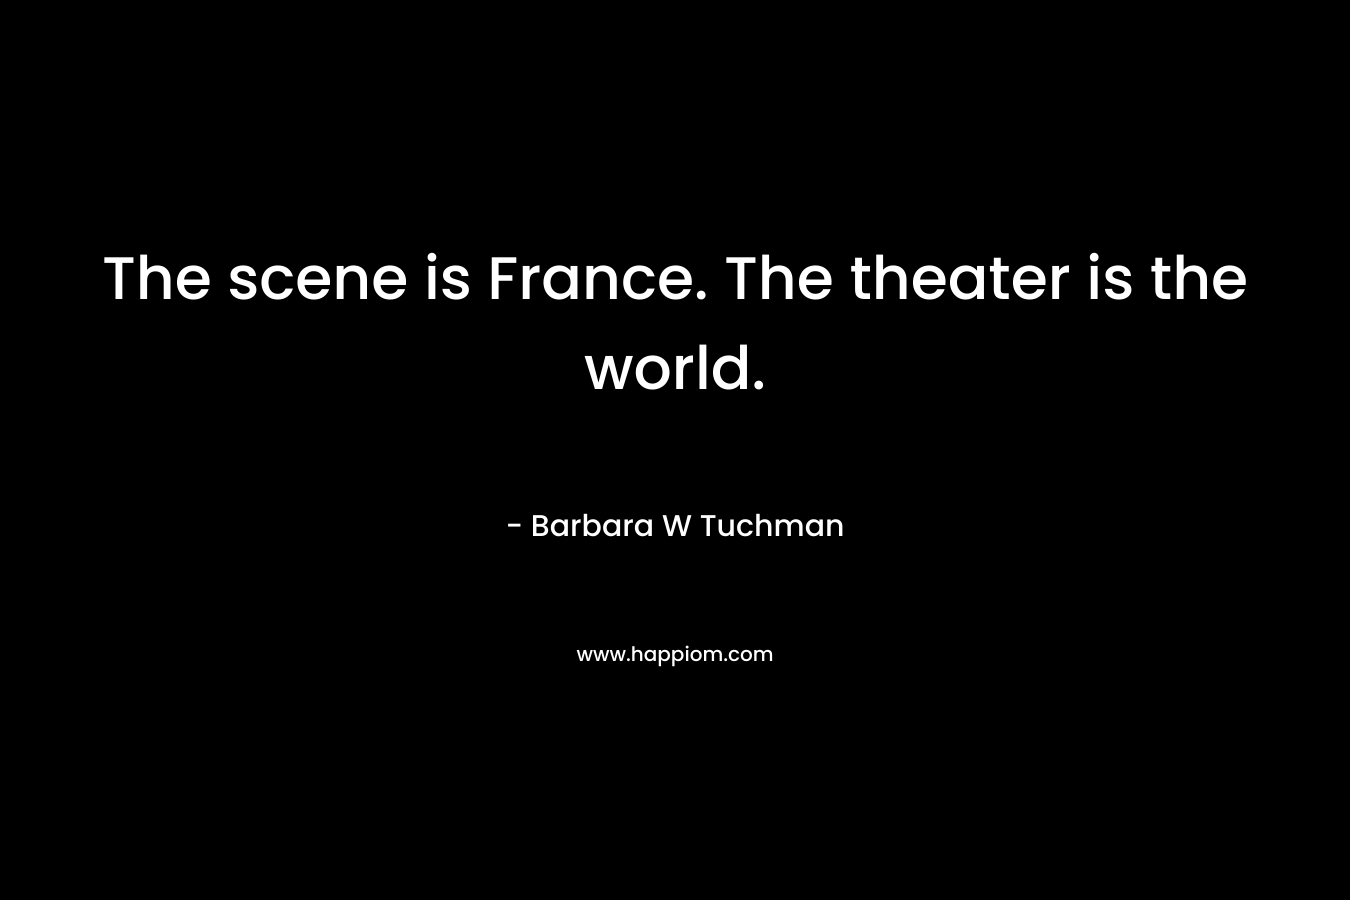 The scene is France. The theater is the world.